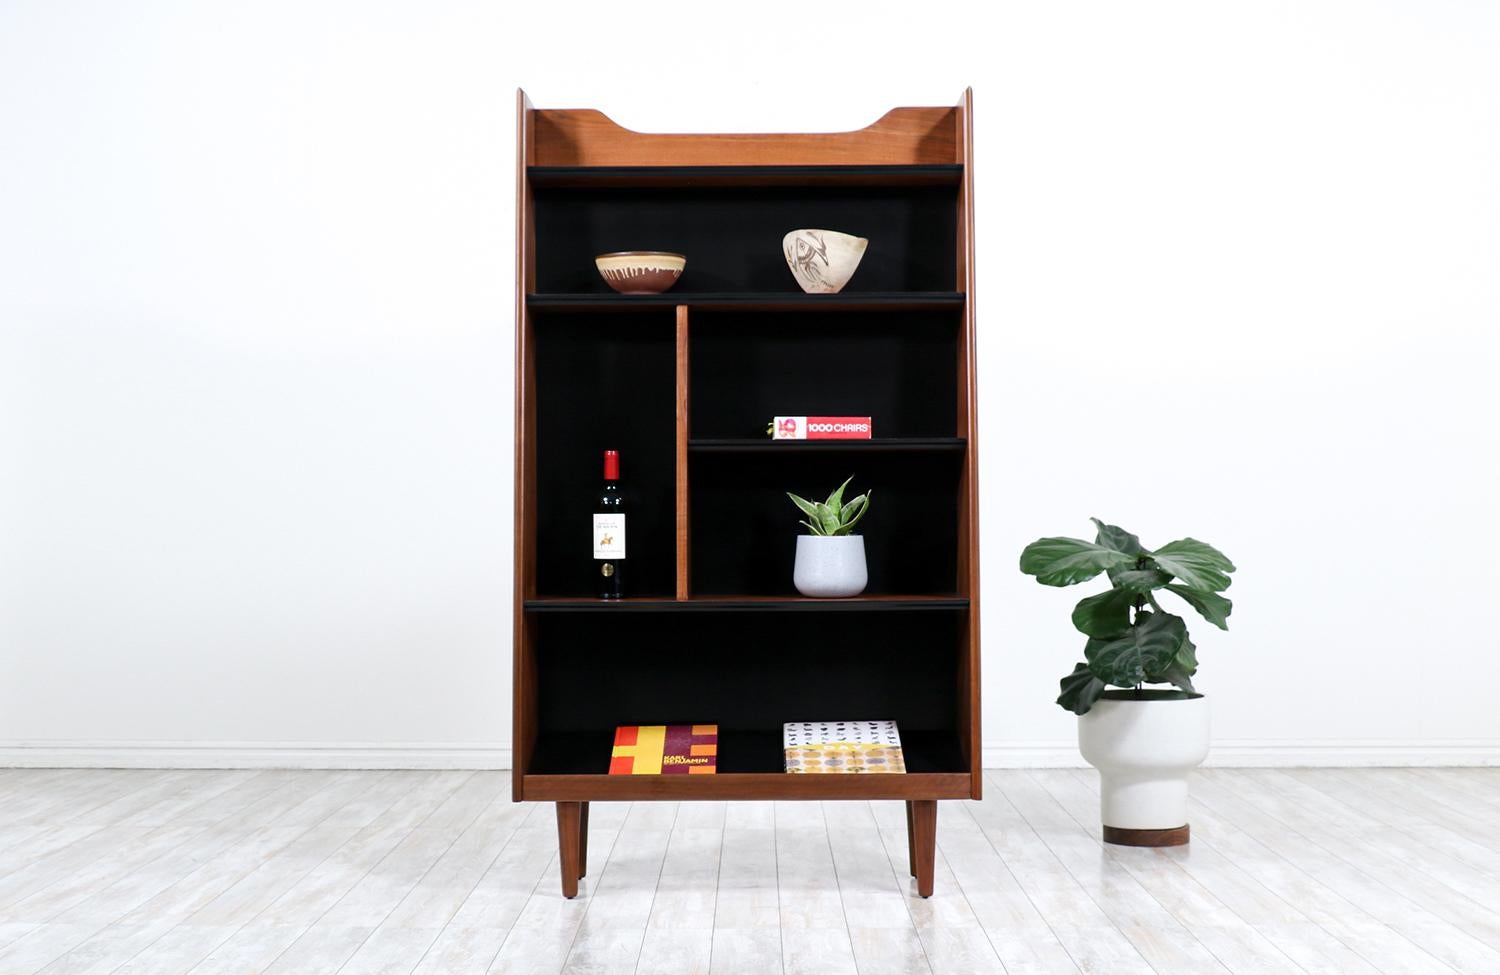 Merton L. Gershun free-standing taper bookshelf for Dillingham.

________________________________________

Transforming a piece of Mid-Century Modern furniture is like bringing history back to life, and we take this journey with passion and